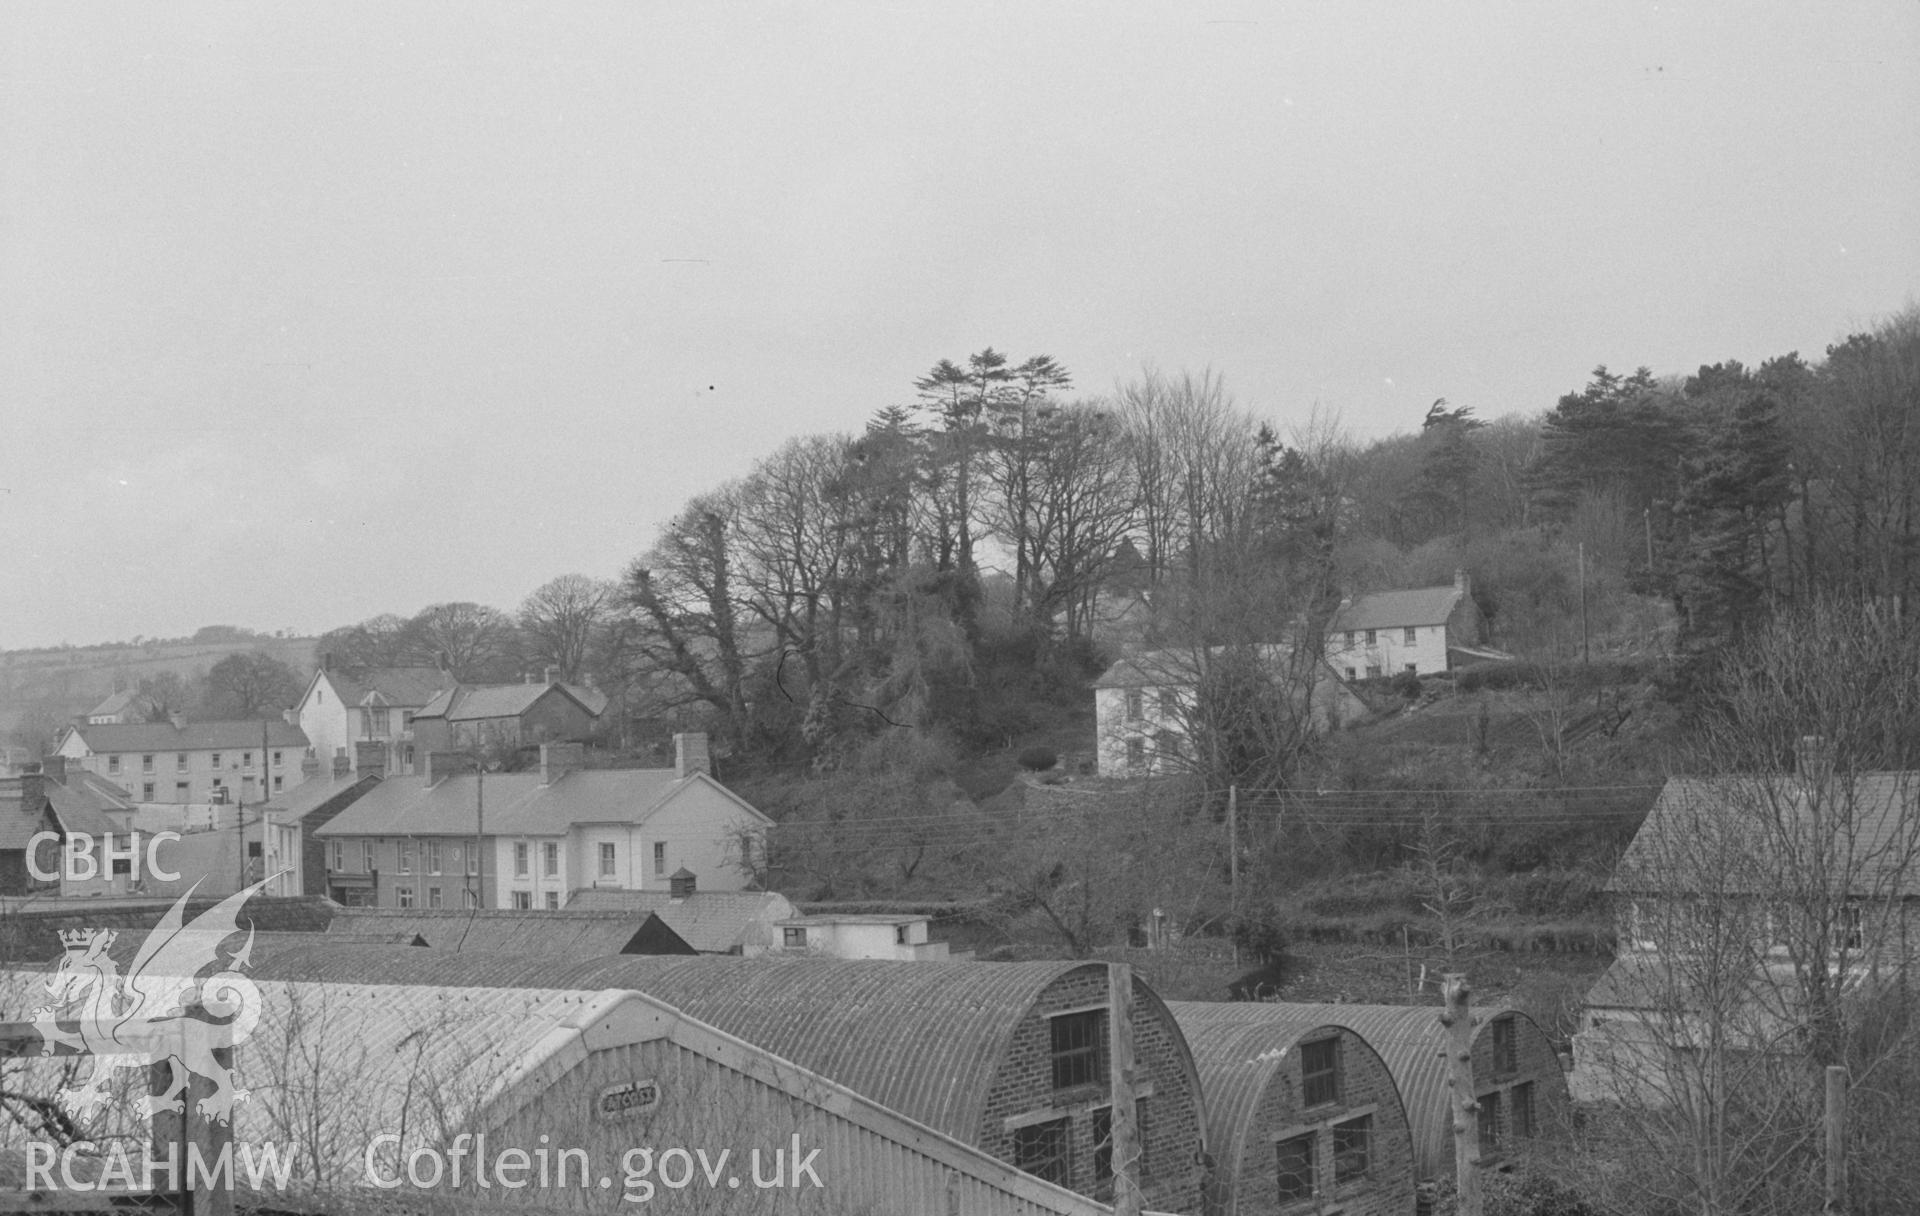 Digital copy of a black and white negative showing view looking across the Teifi to Adpar, Newcastle Emlyn, with rookery in centre. Photographed by Arthur O. Chater in April 1966 looking north north west from Grid Reference SN 310 407.